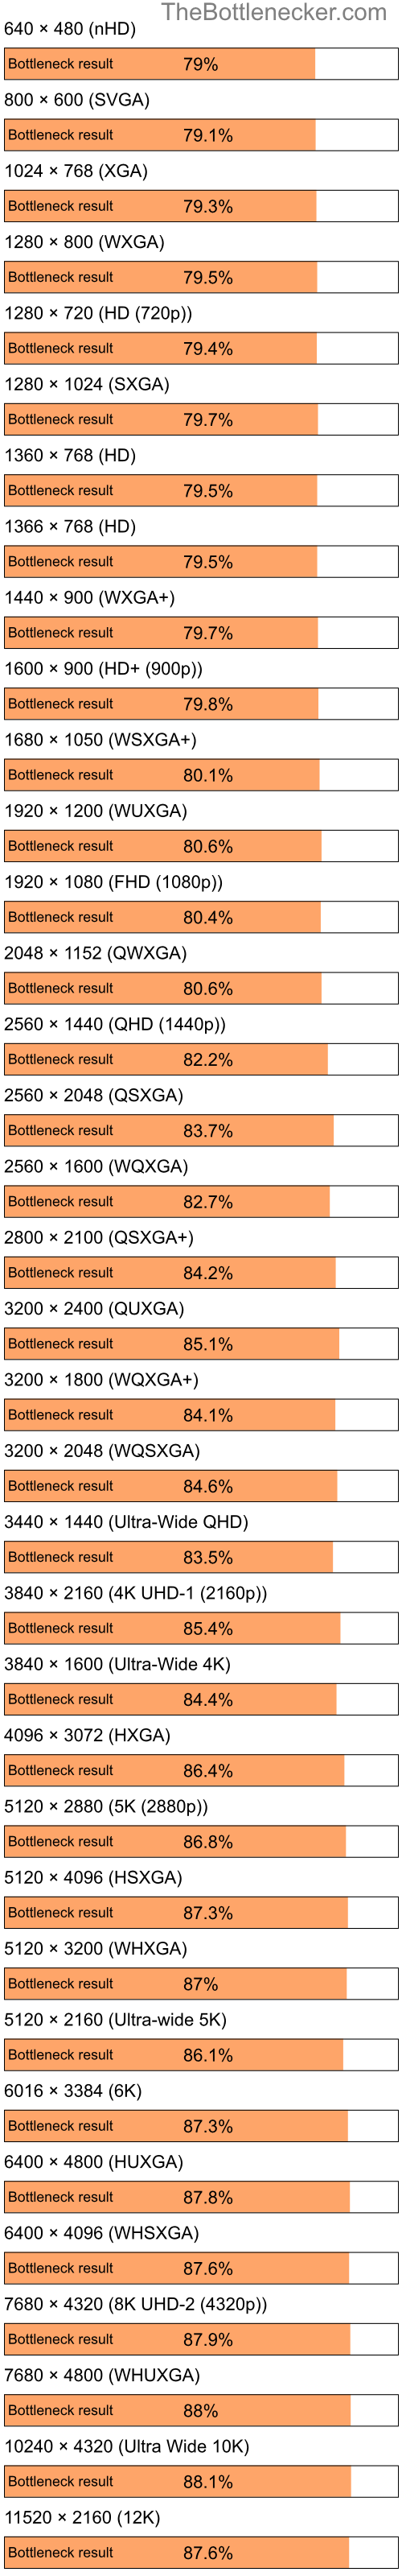 Bottleneck results by resolution for Intel Atom N280 and NVIDIA nForce 630a in7 Days to Die